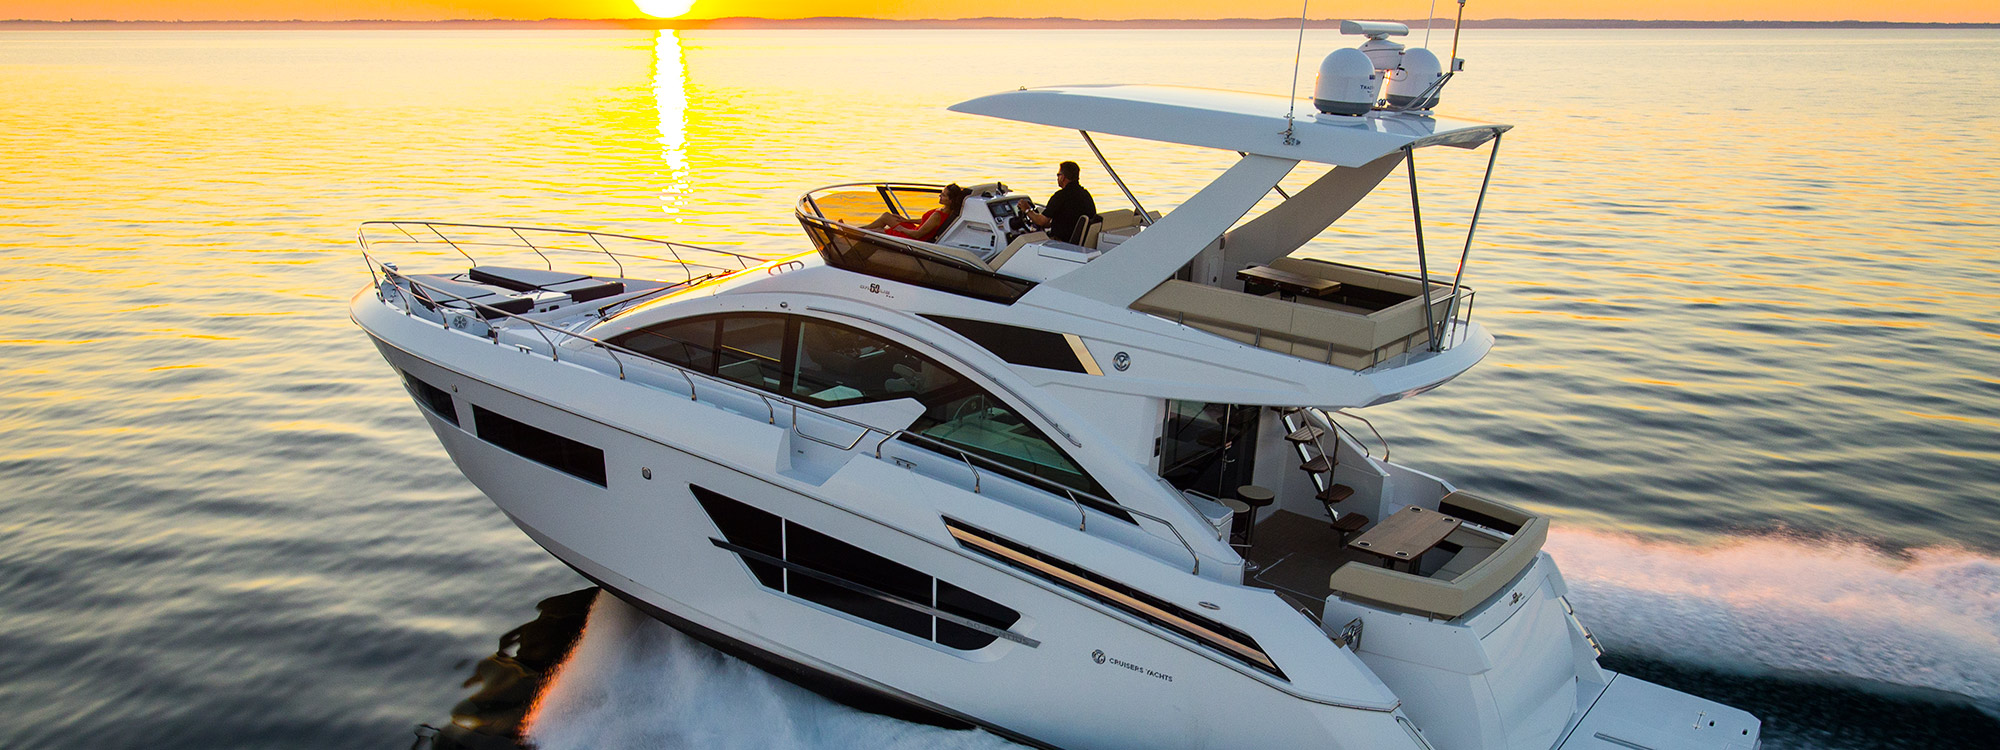 cruisers yachts 60 fly price